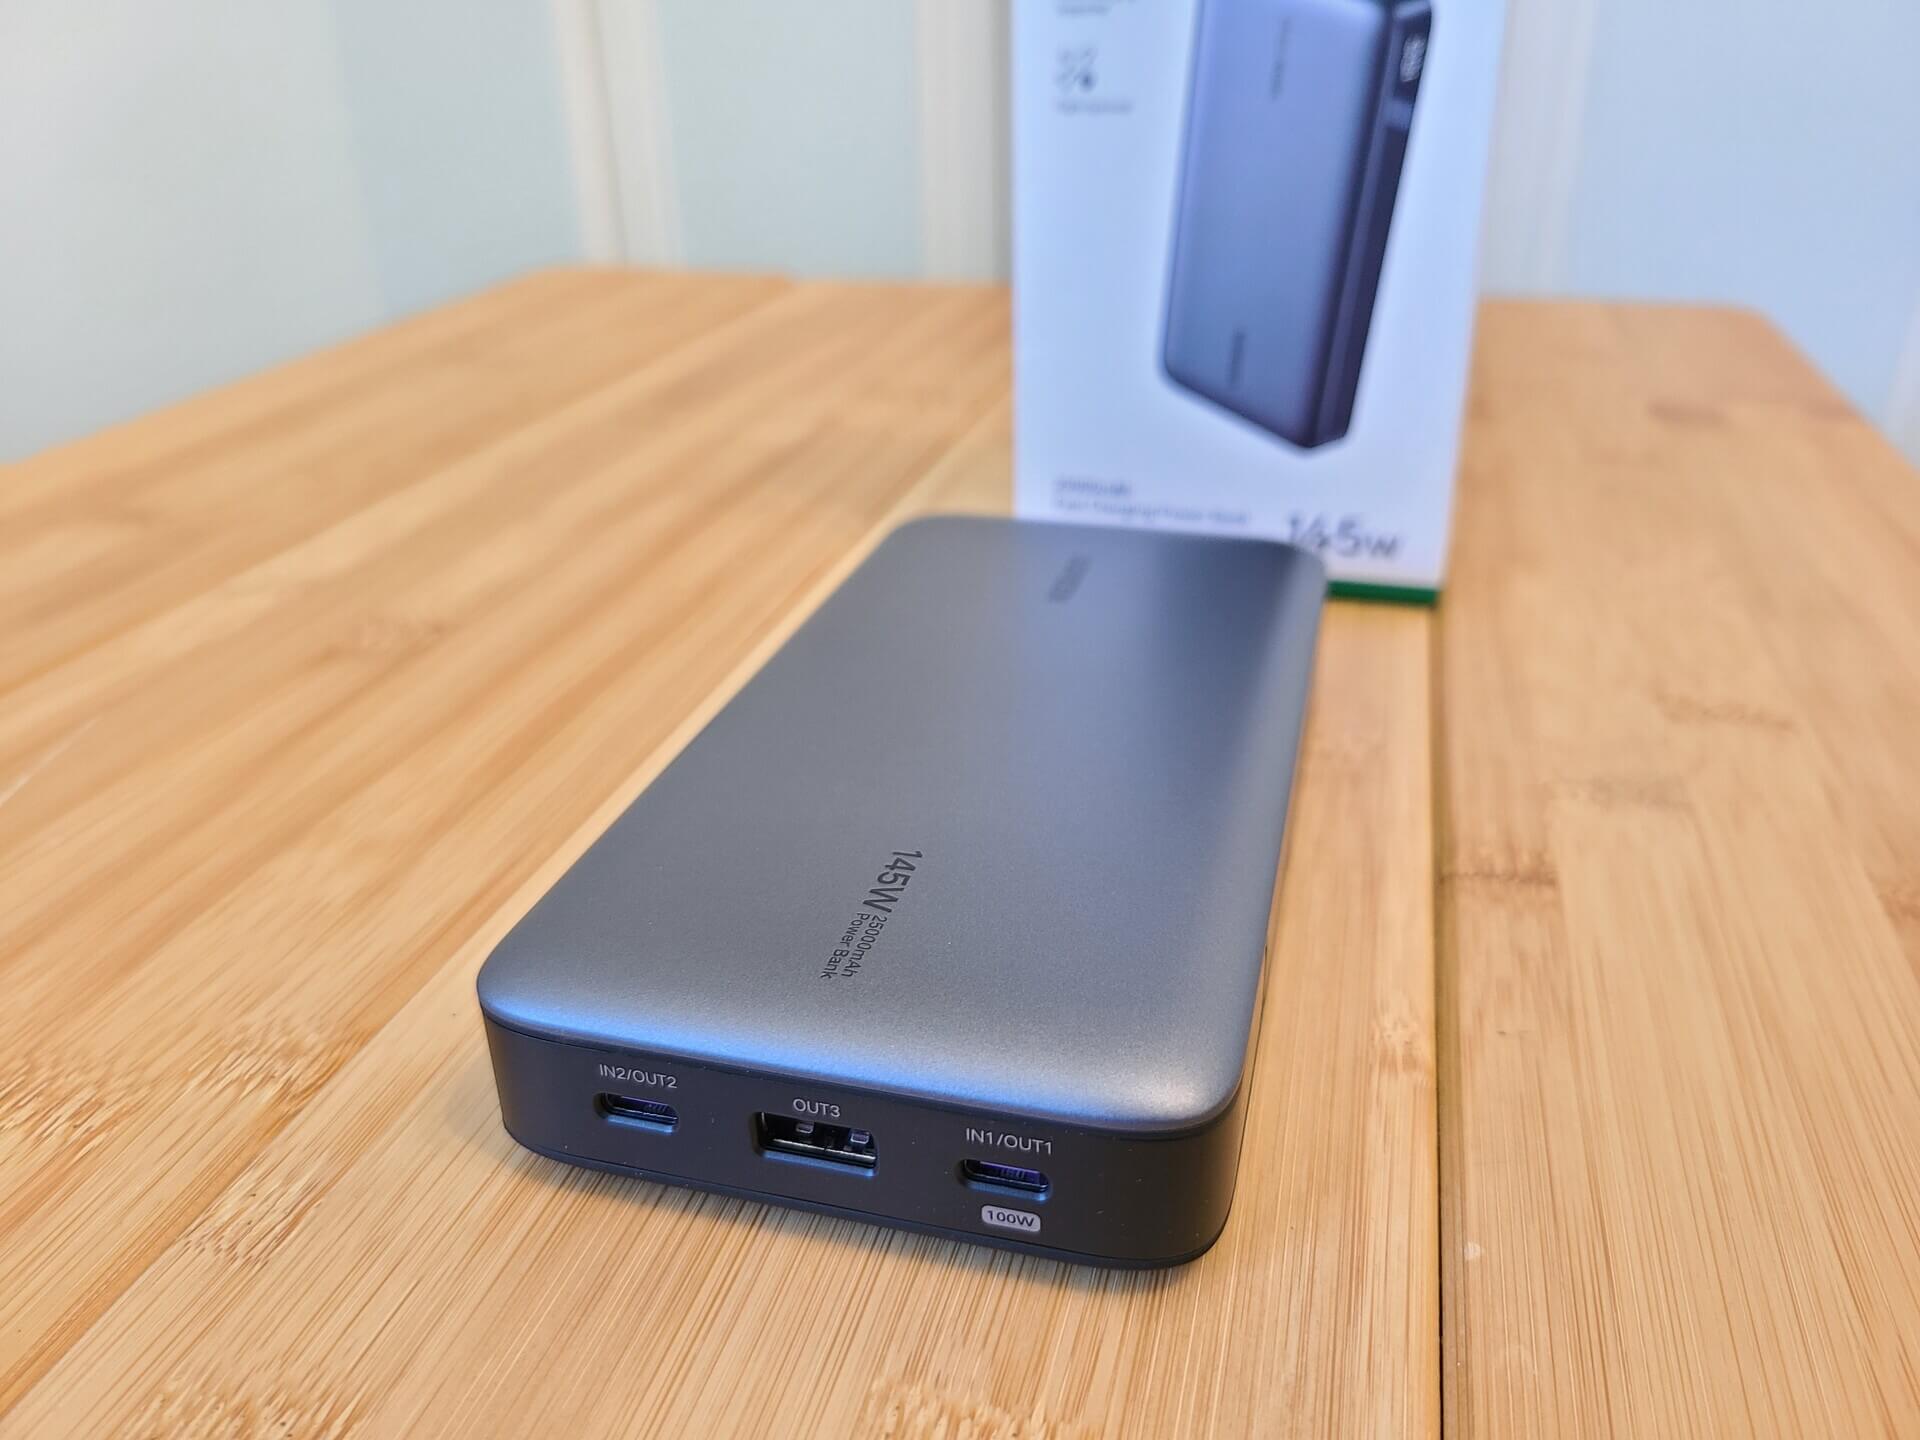 UGREEN 145W Power Bank review